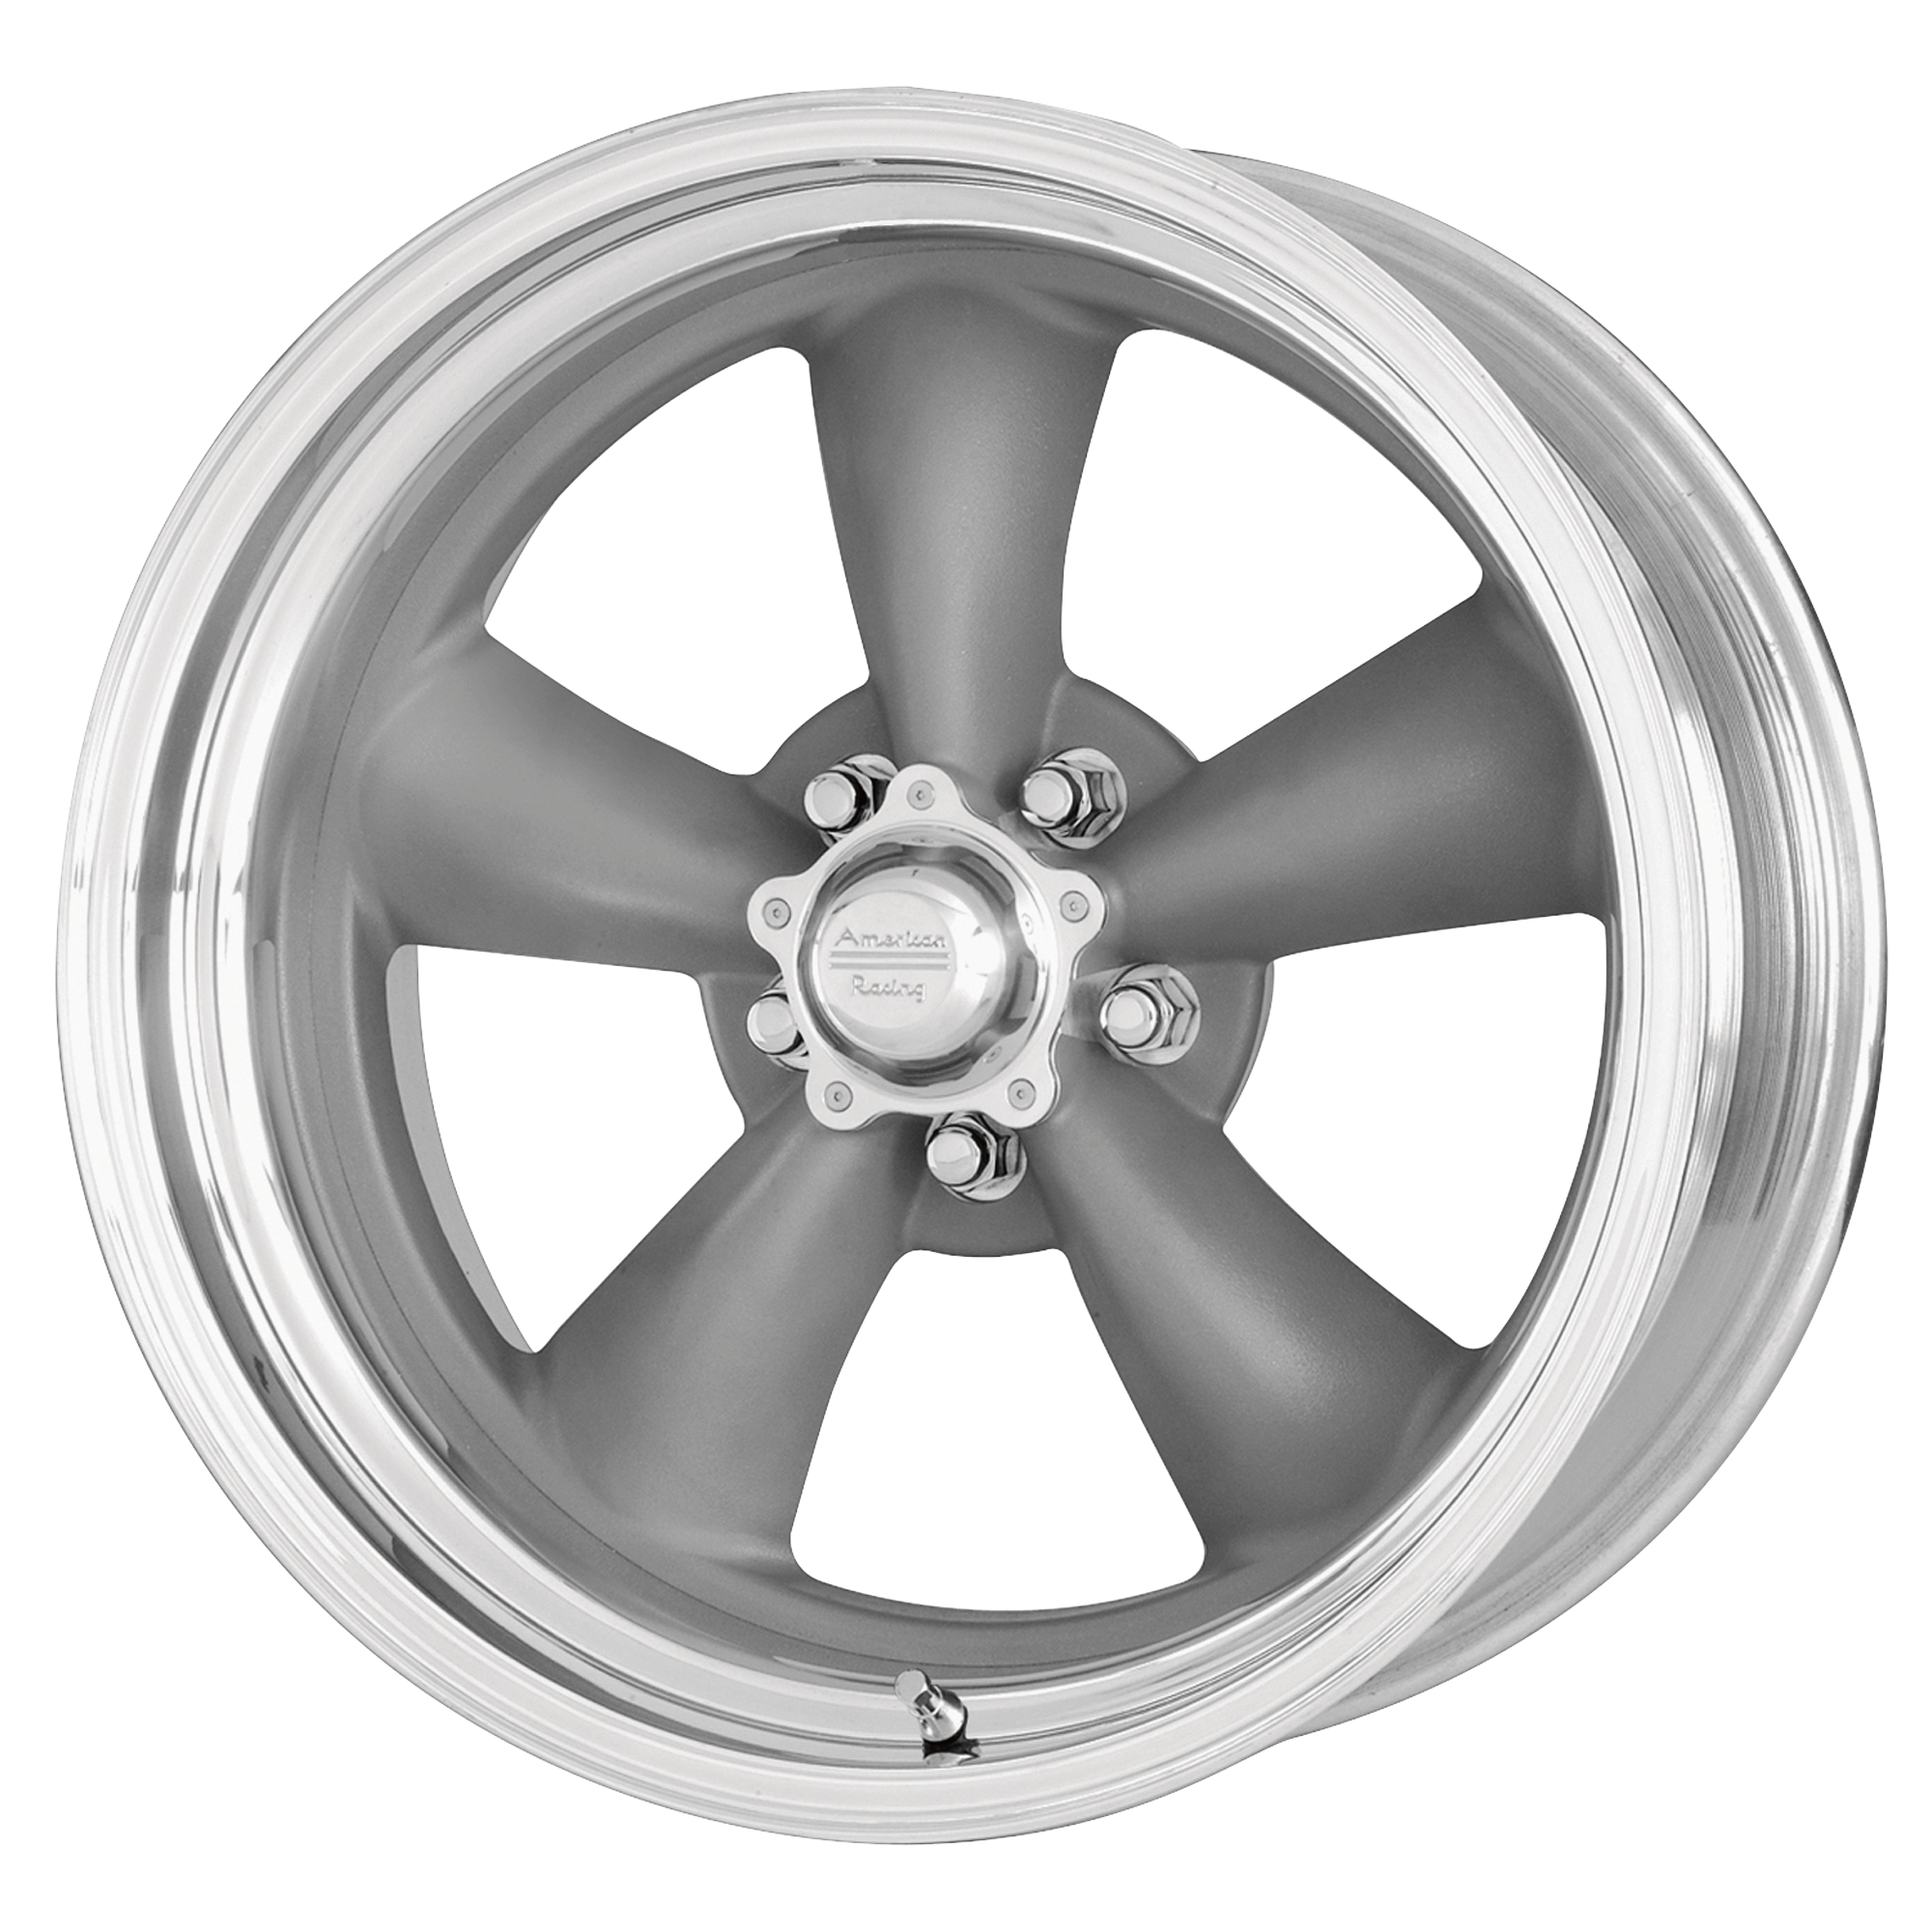 CLASSIC TORQ THRUST II ONE PIECE 15x7 5x127.00 MAG GRAY W/ MACHINED LIP (-6 mm) - Tires and Engine Performance